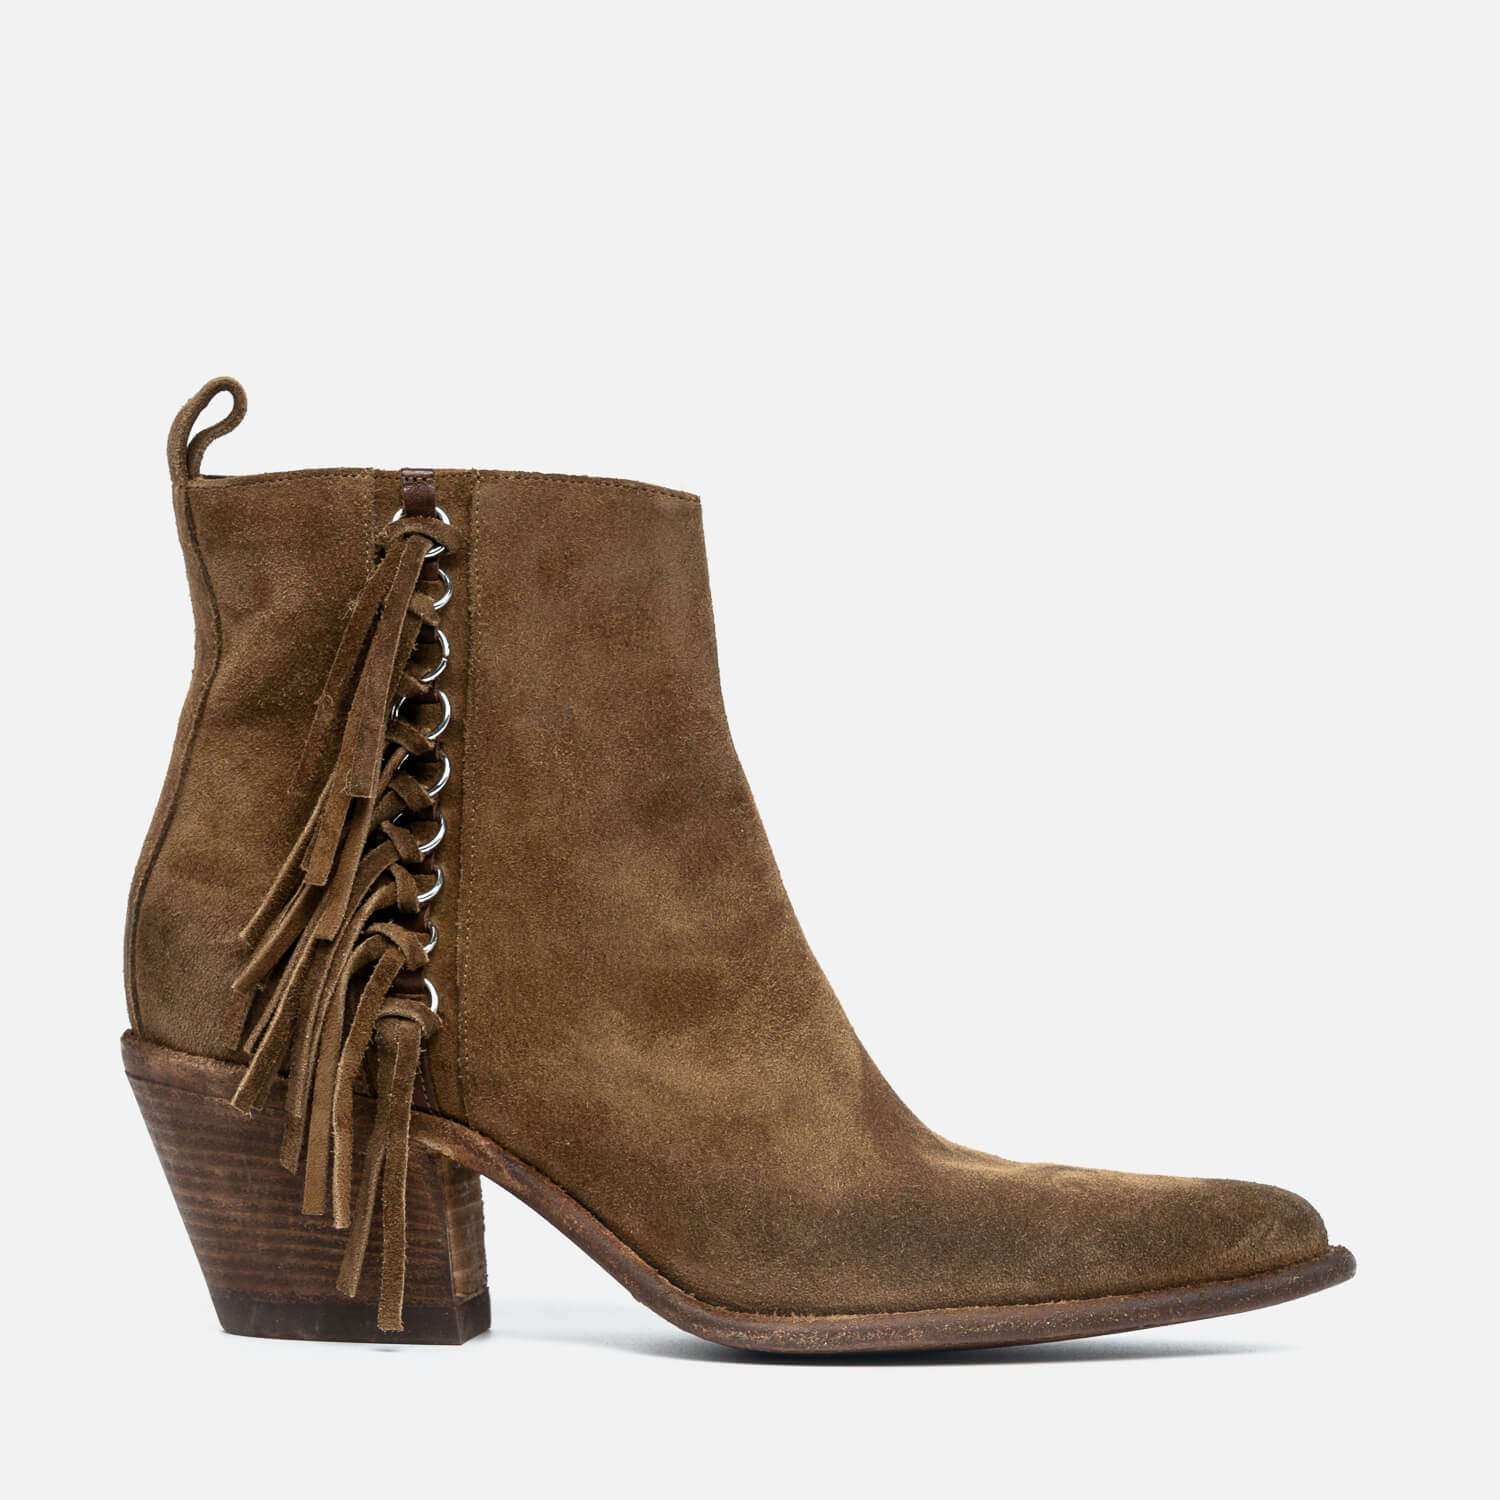 Anna | Model 3785 Texan-style boots beer-colored